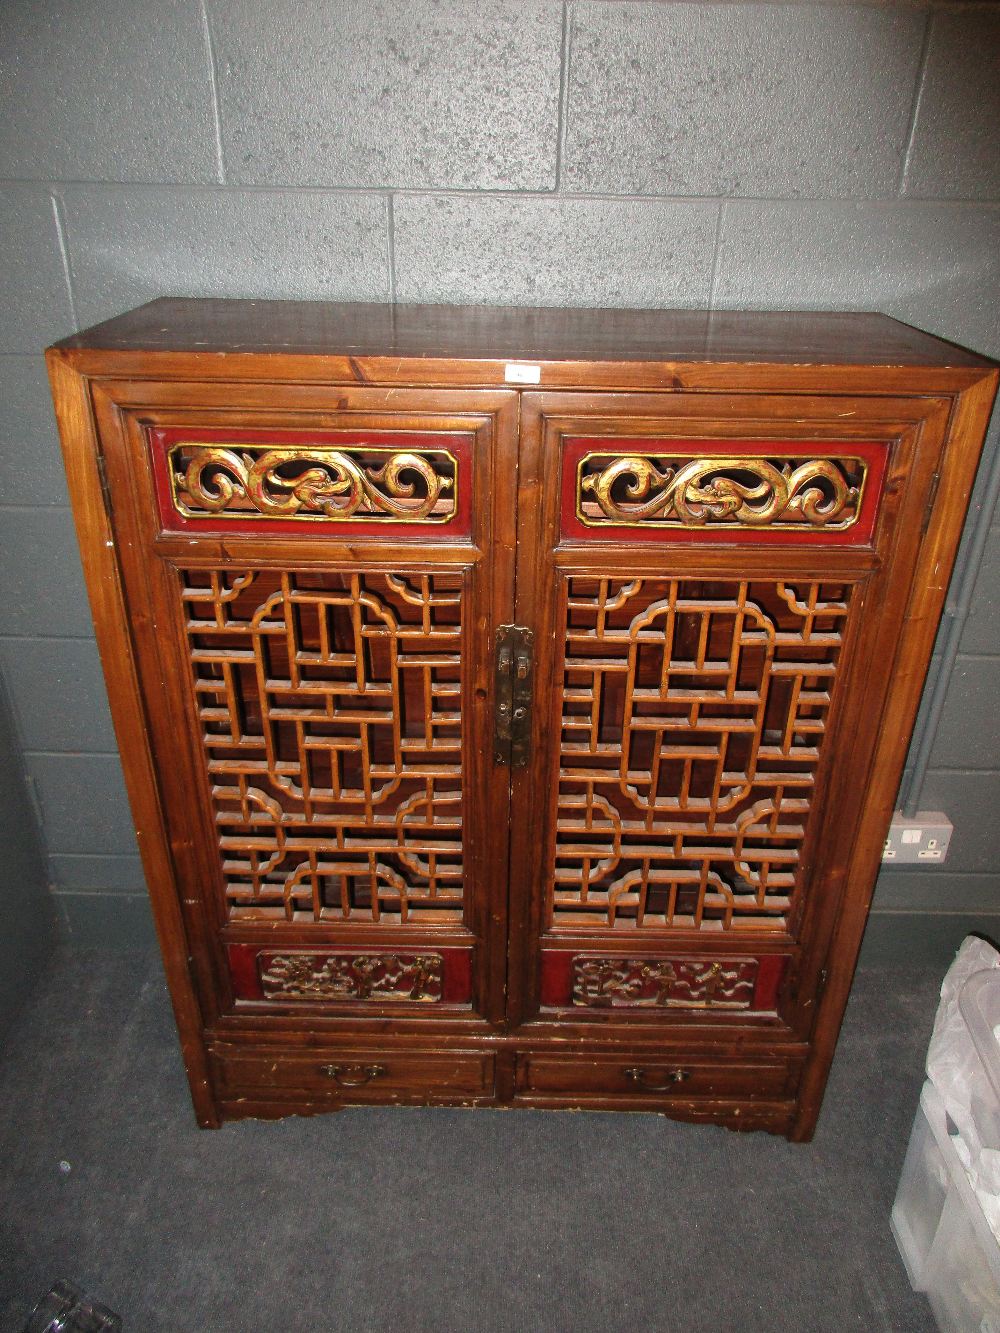 A late 19th/early 20th century Chinese cabinet, 121.5 x 98 x 38cm (47.5 x 38.5 x 15 in)